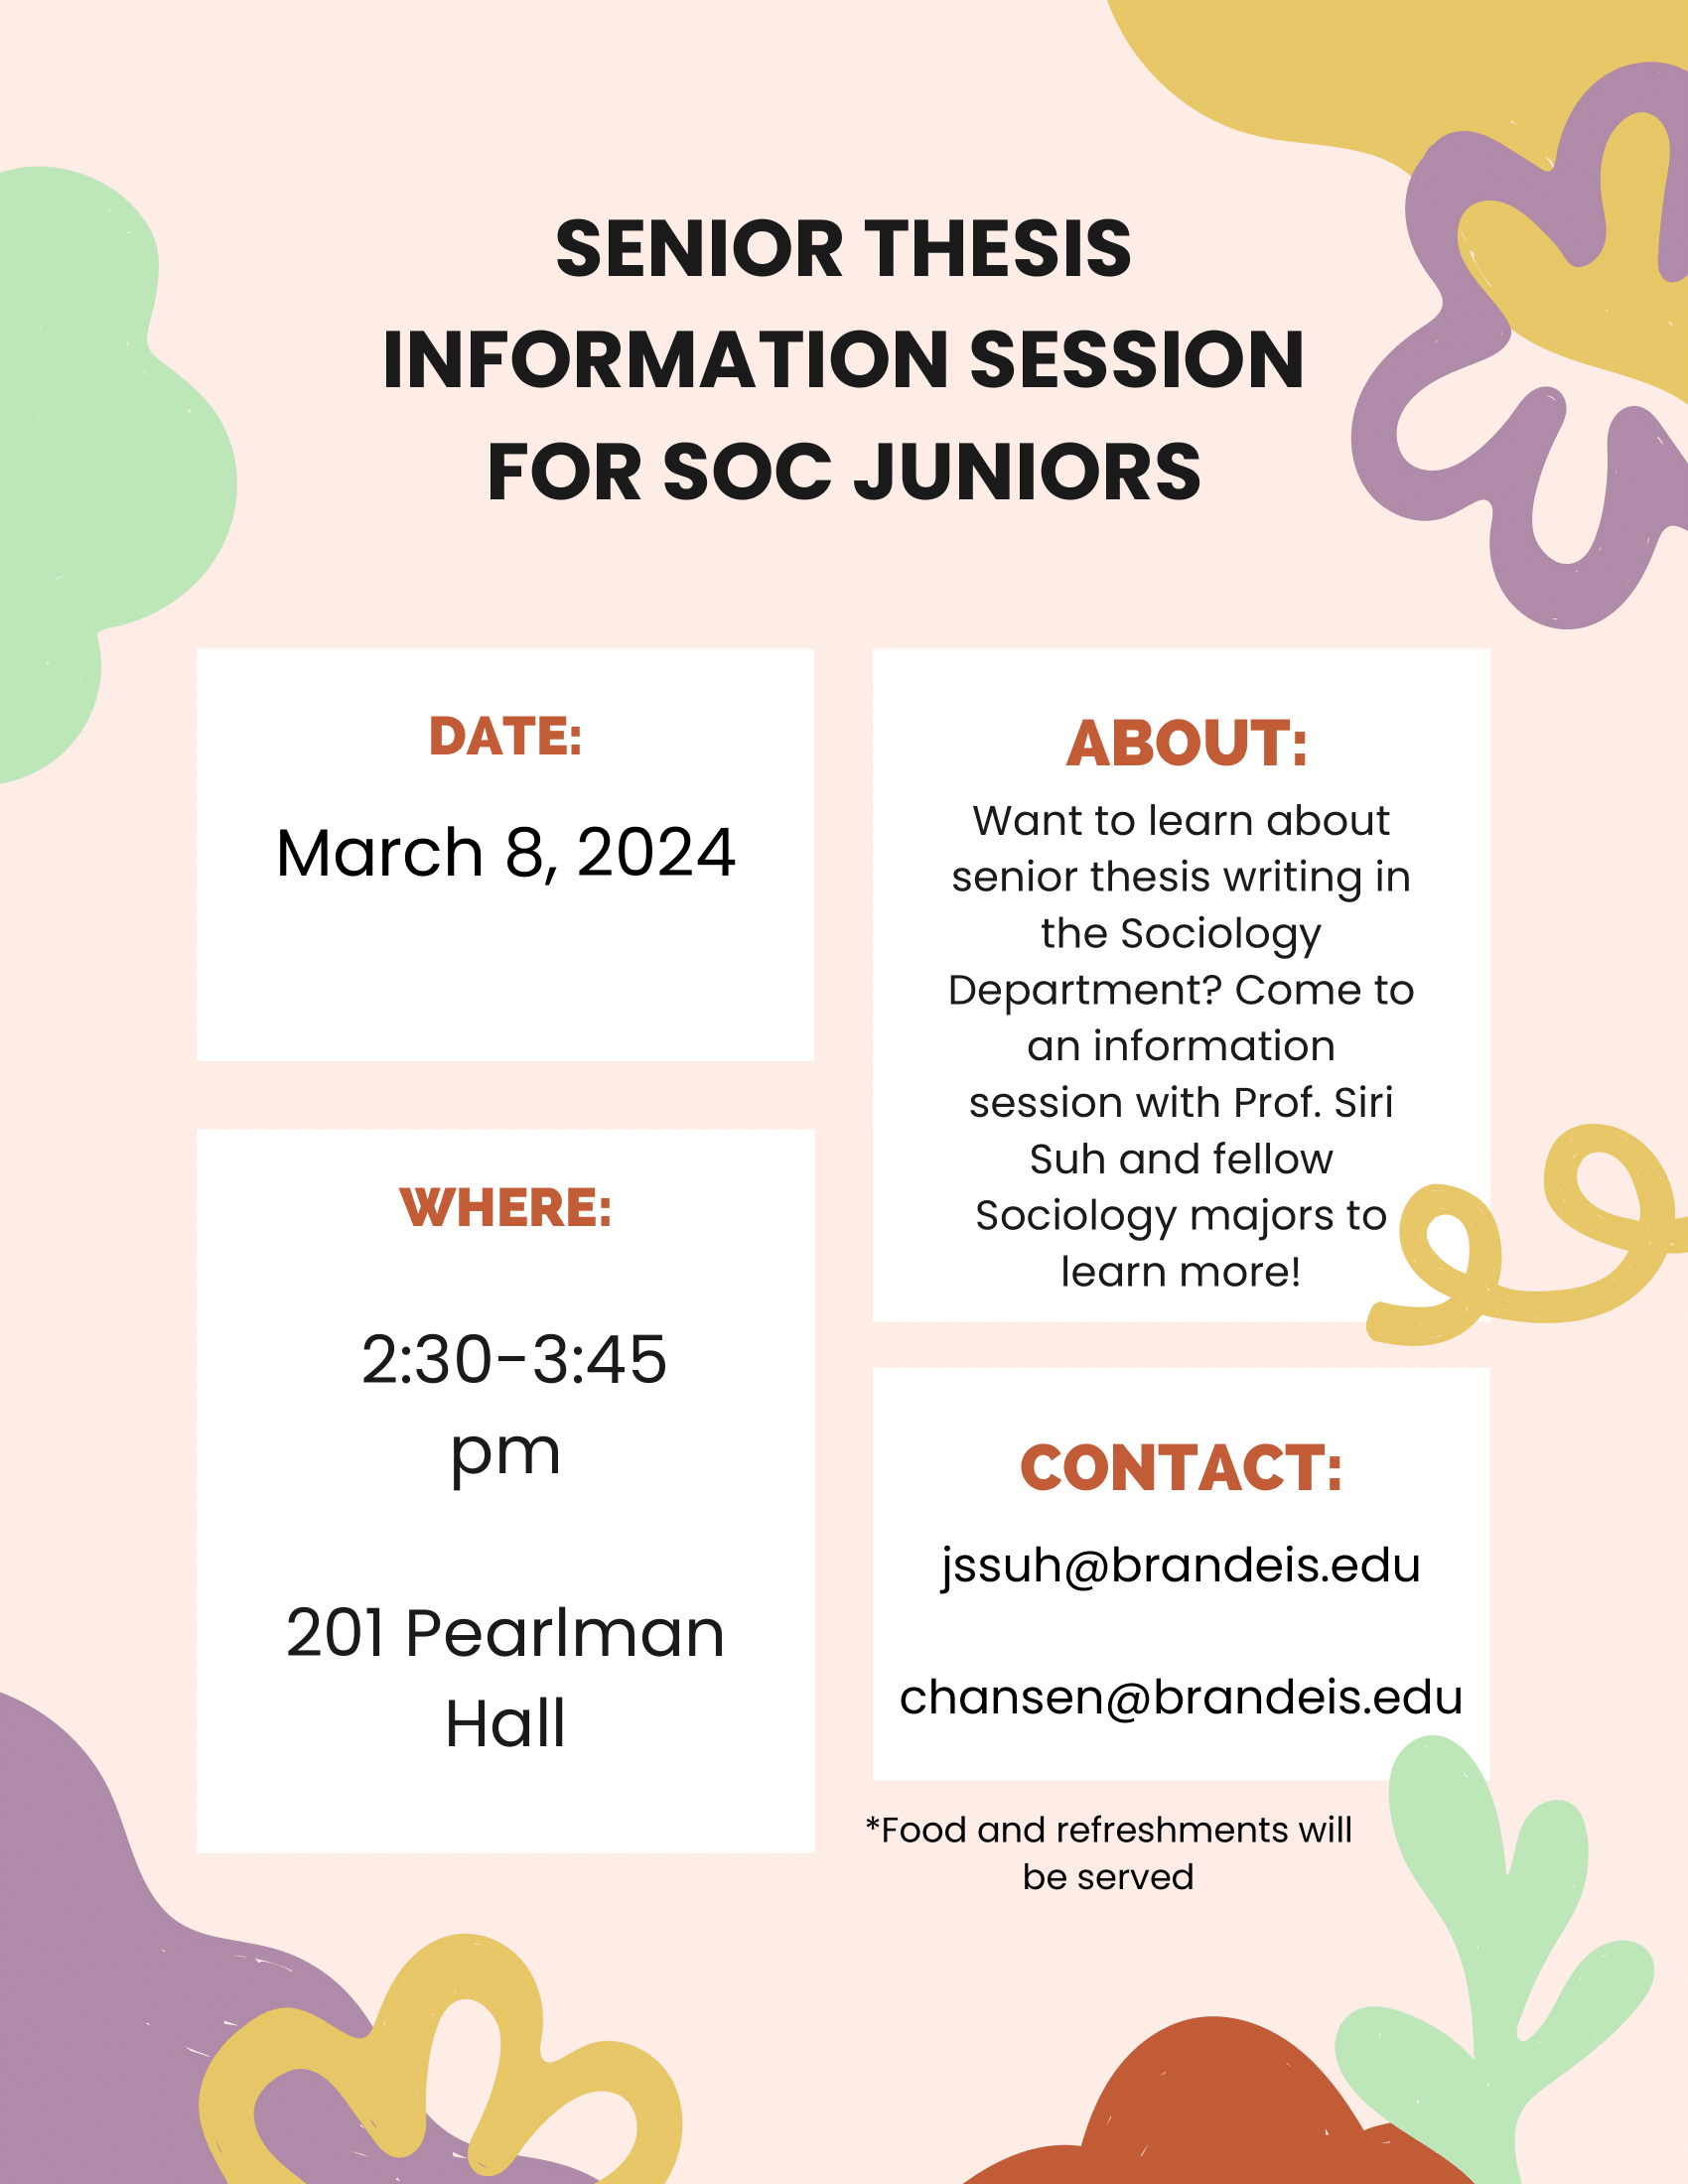 pink flyer with text that reads Senior Thesis Information Session on March 8, 2024 from 2:30 to 3:45 in 201 Pearlman Hall